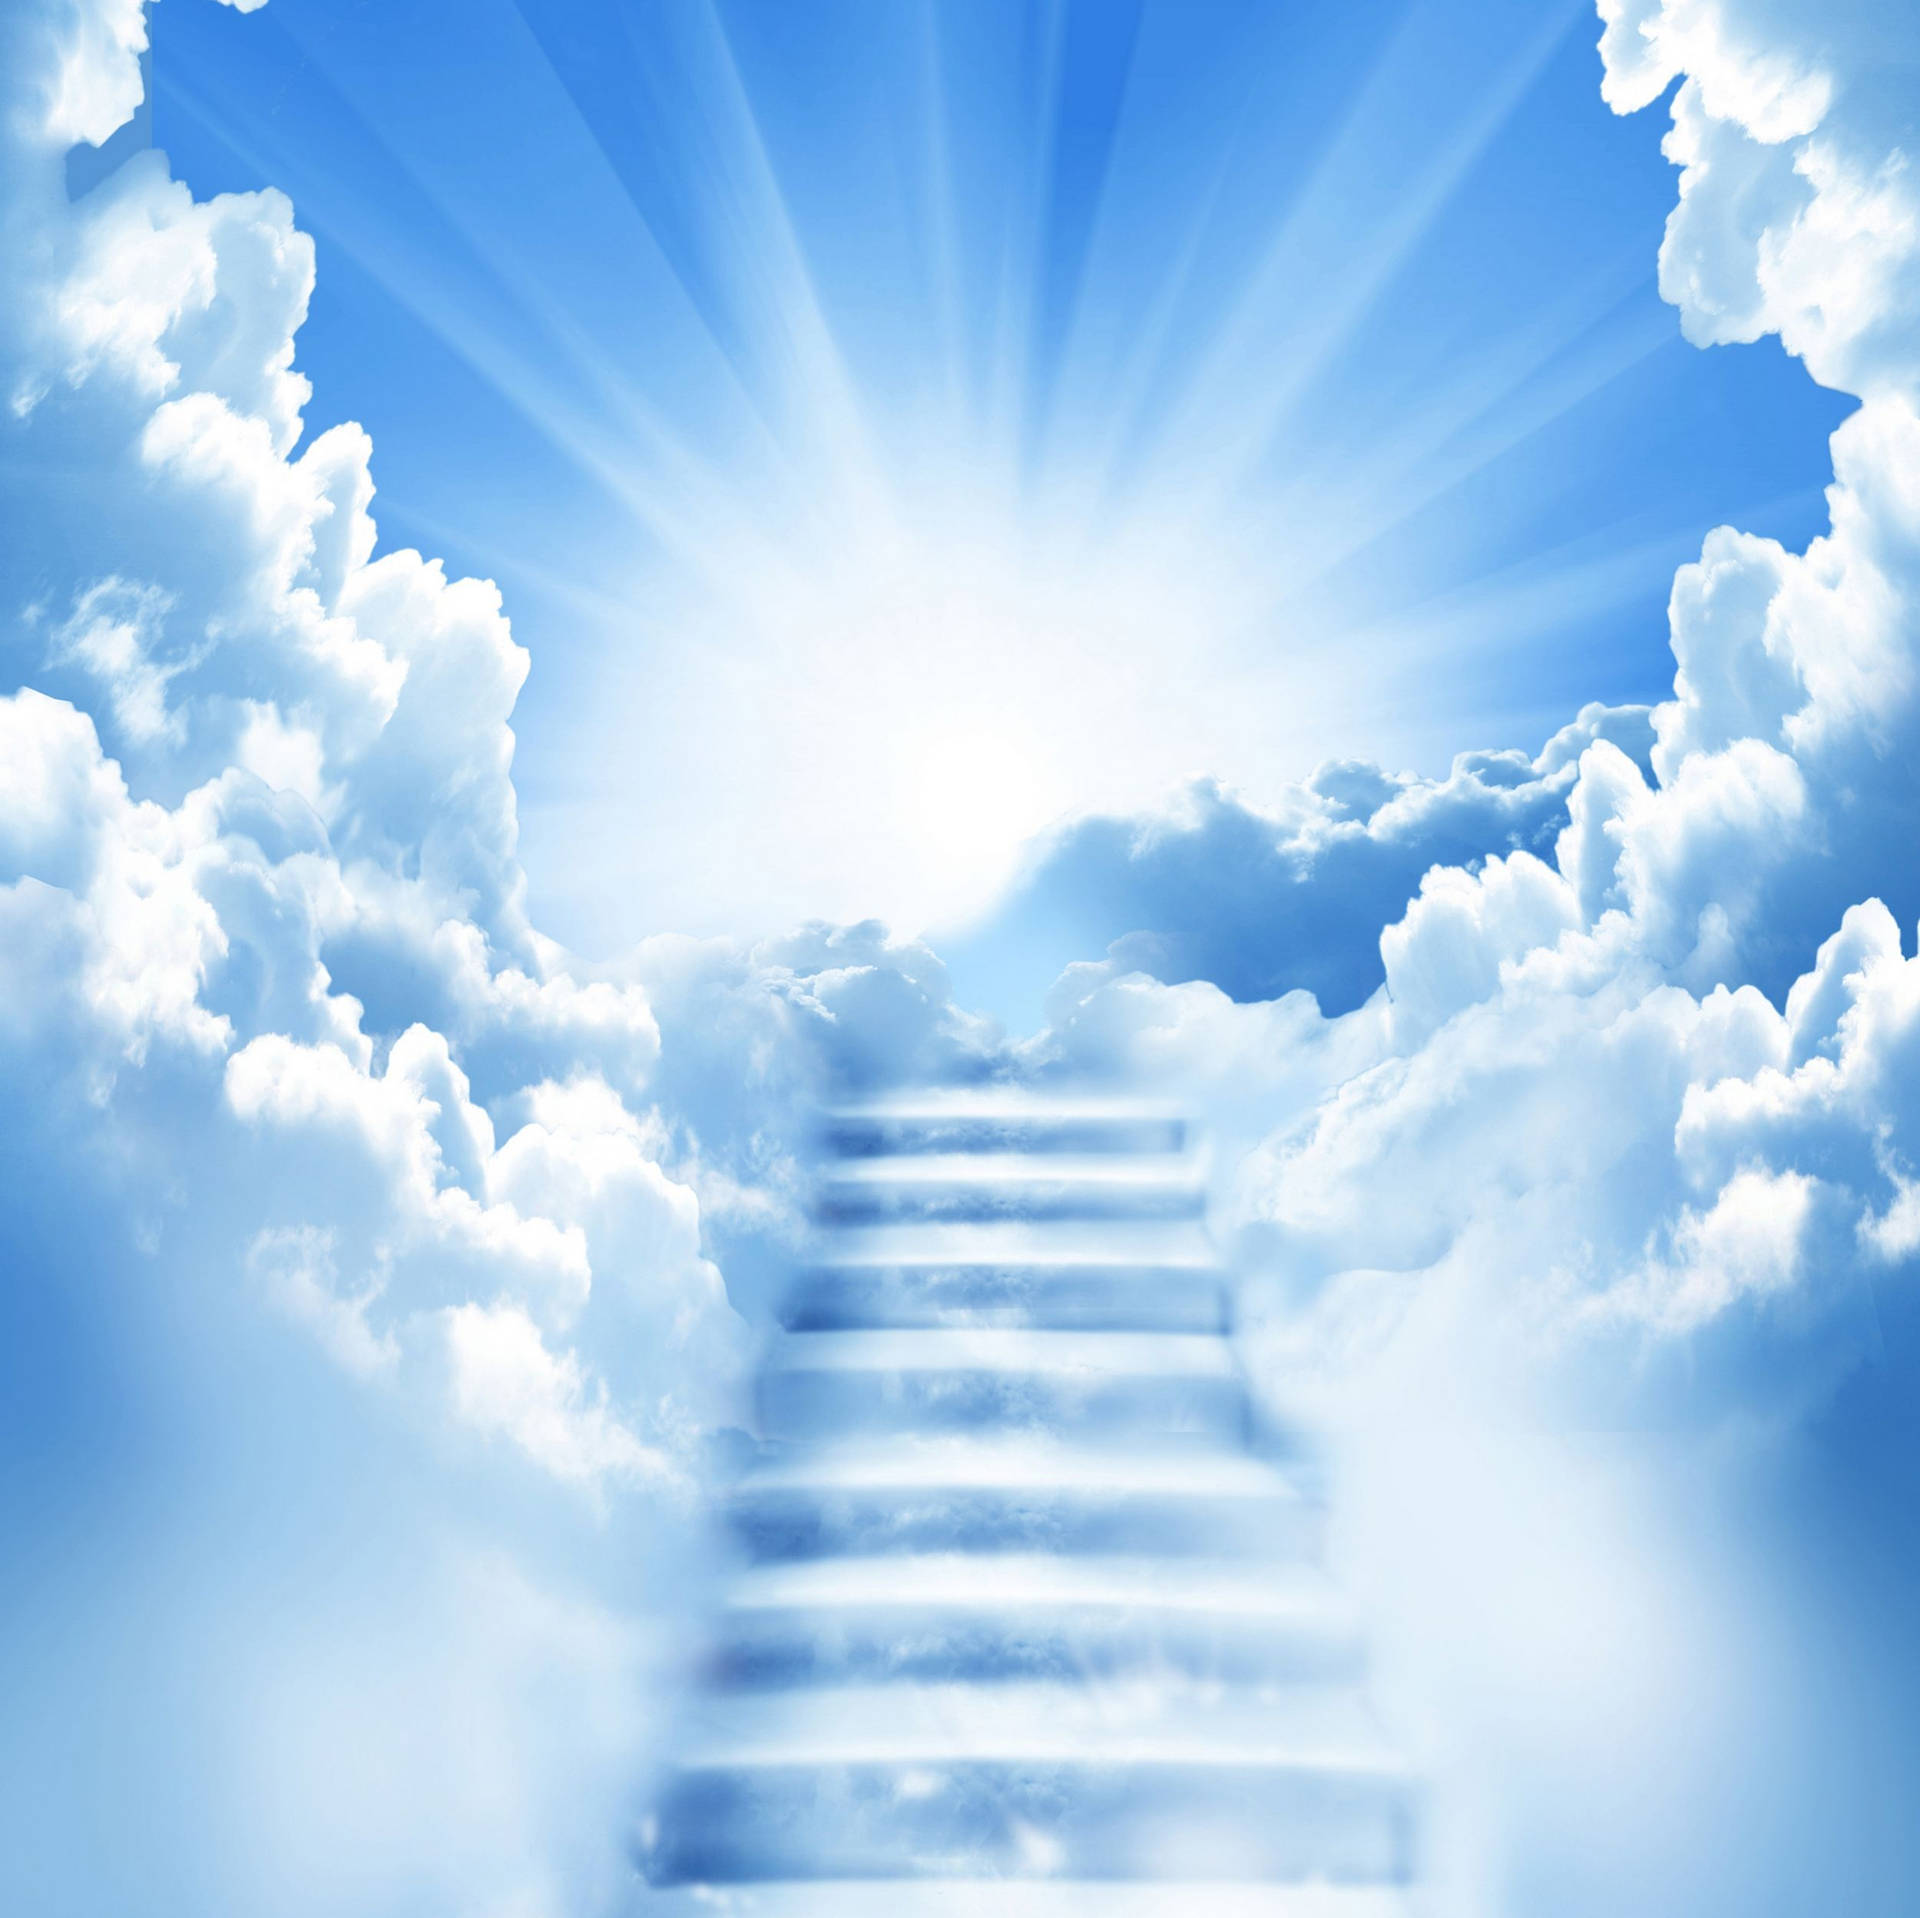 A Staircase Leading To Heaven With A Bright Light Shining Through The Clouds Background